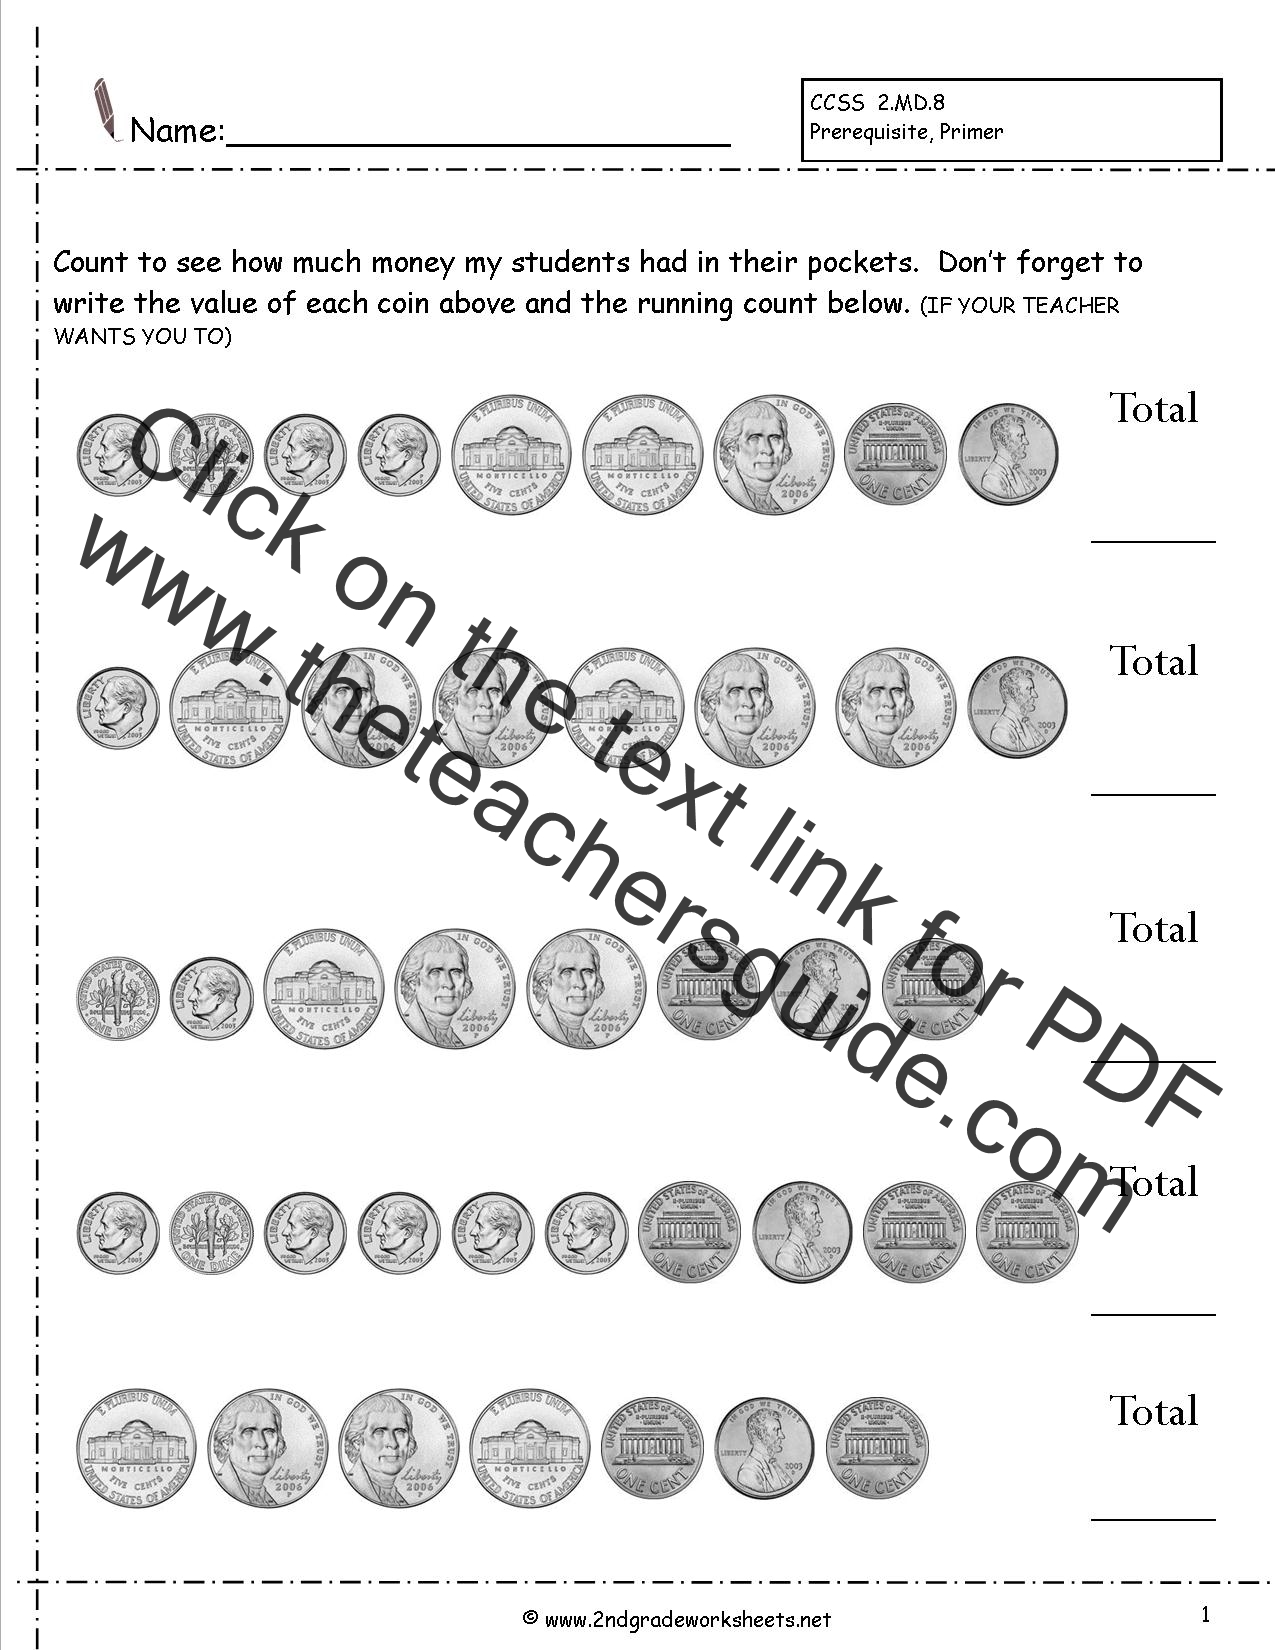 ccss-2-md-8-worksheets-counting-coins-worksheets-money-wordproblems